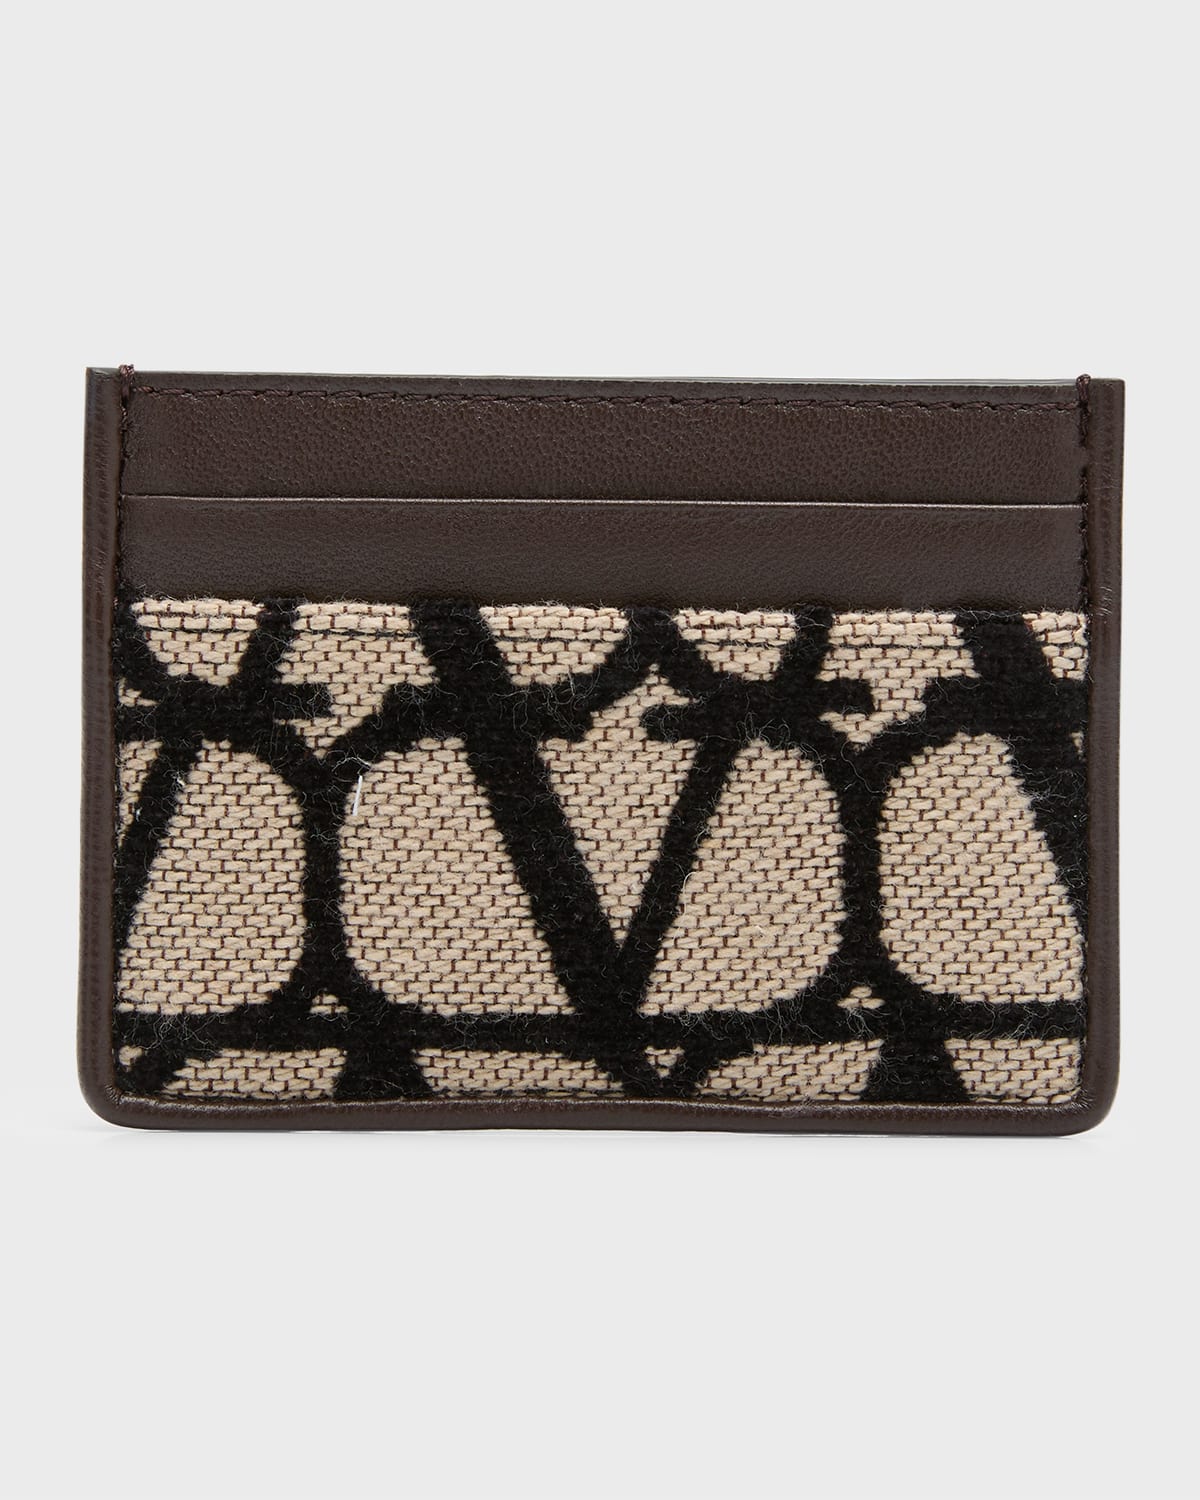 LE MONOGRAMME card holder in CASSANDRE CANVAS AND SMOOTH LEATHER